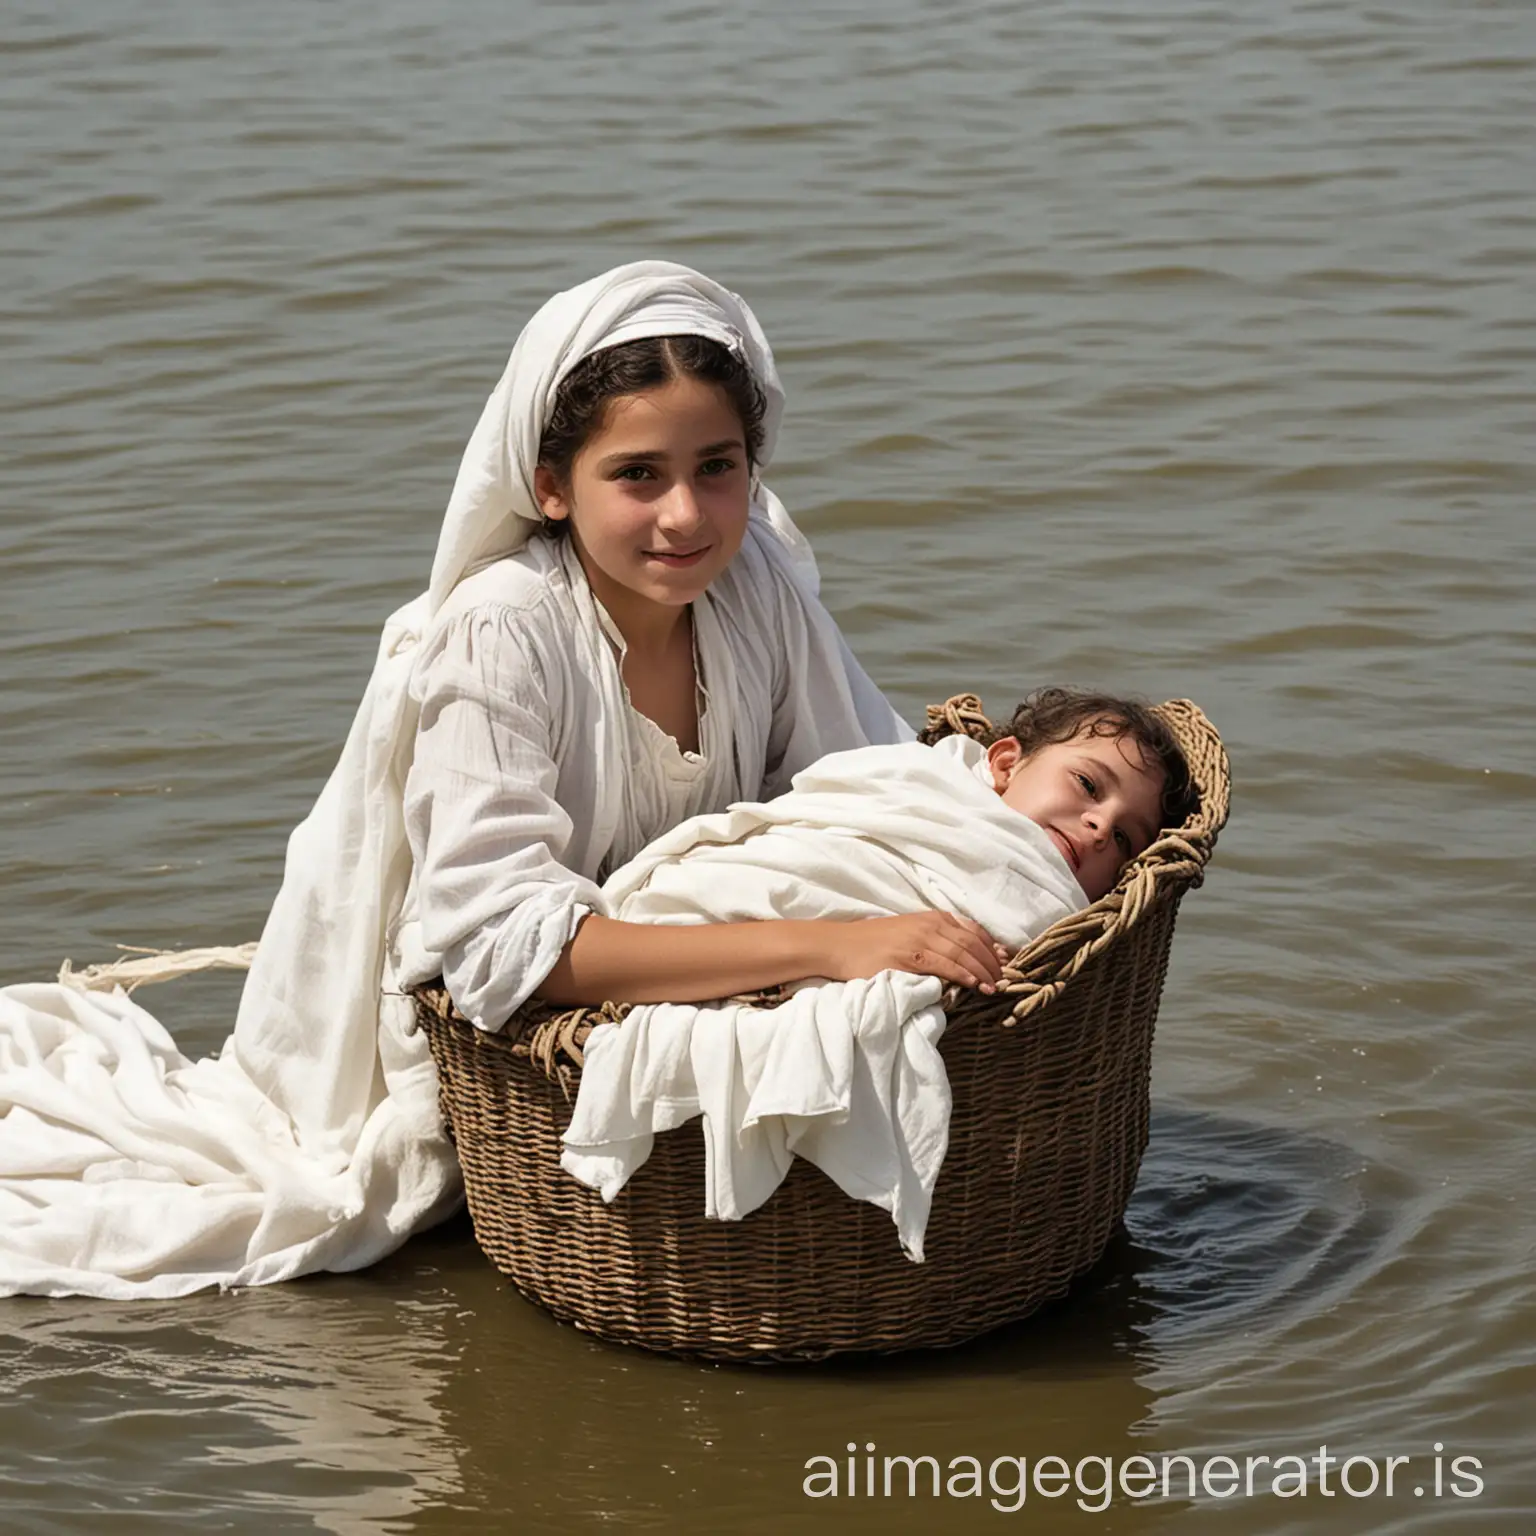 Young-Girl-in-Old-Jewish-Clothes-Places-Baby-in-Nile-River